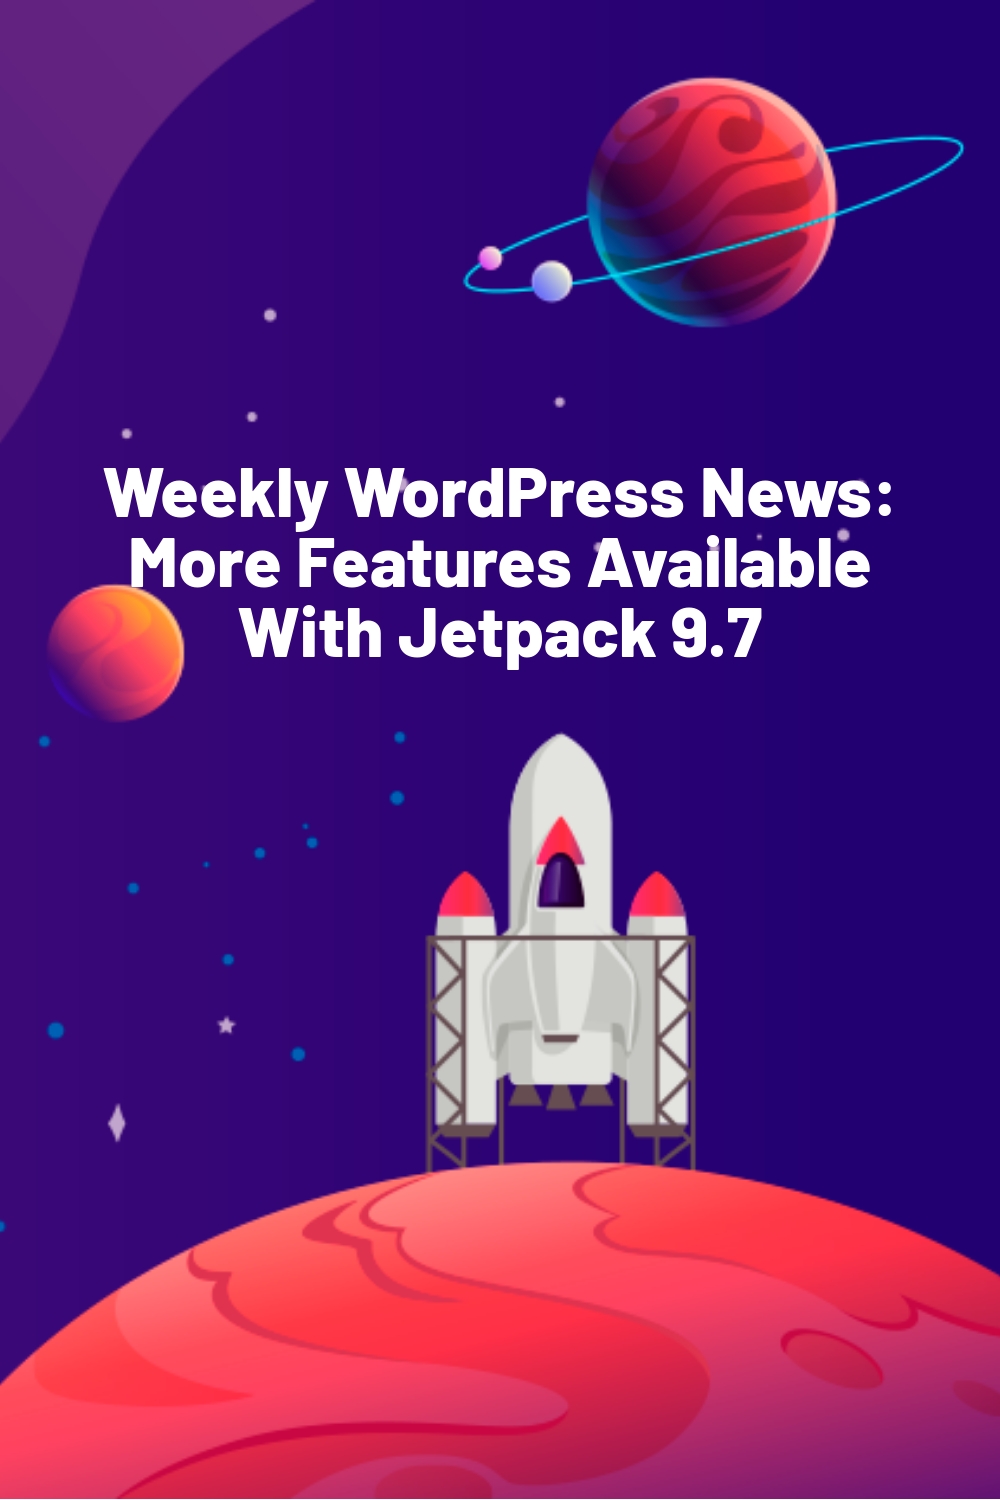 Weekly WordPress News: More Features Available With Jetpack 9.7